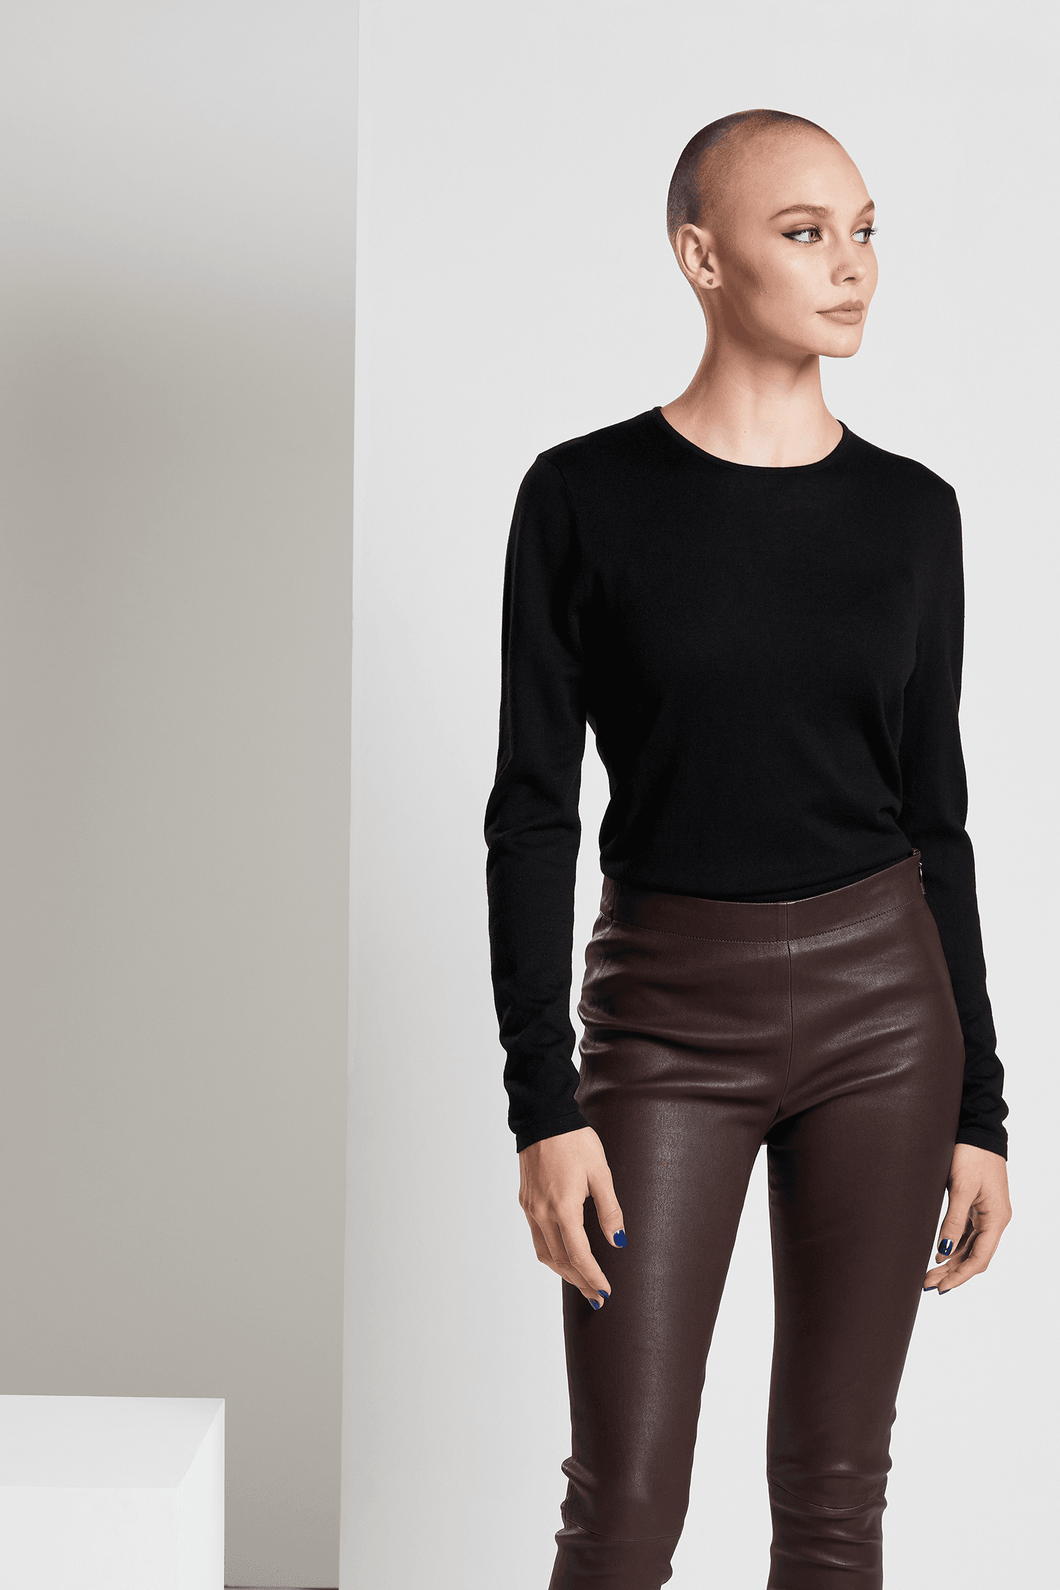 Silk Cashmere Relaxed Fit Crewneck - Black